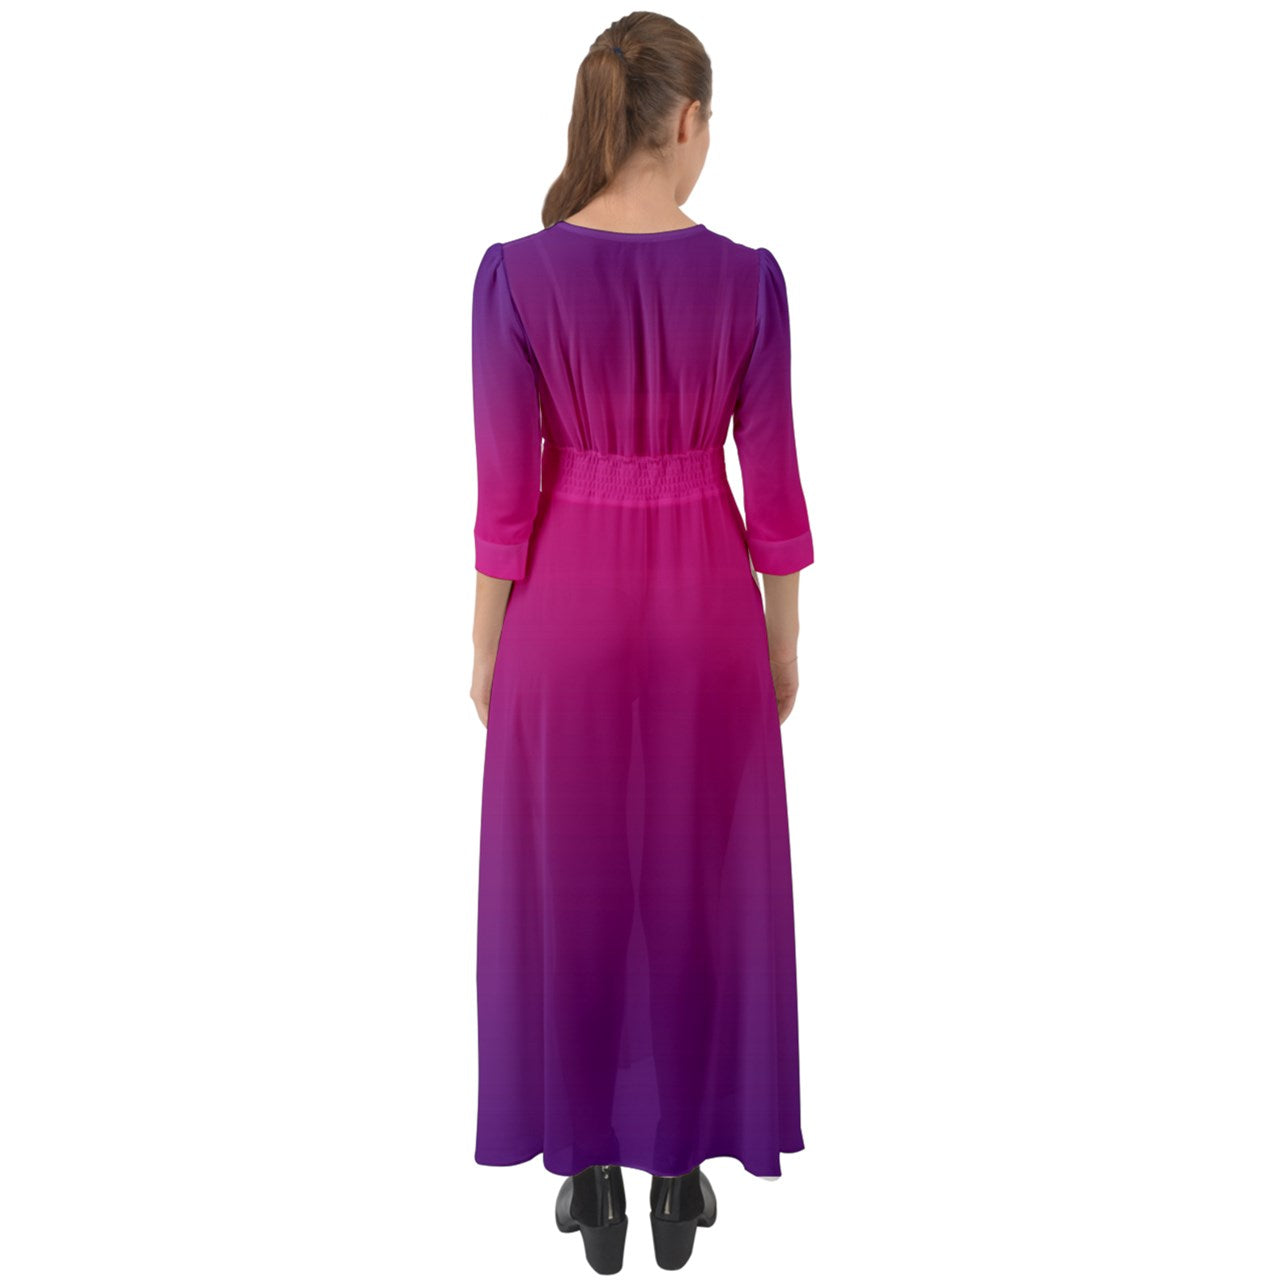 Button Up Ombre Boho Maxi Dress in Pink and Purple